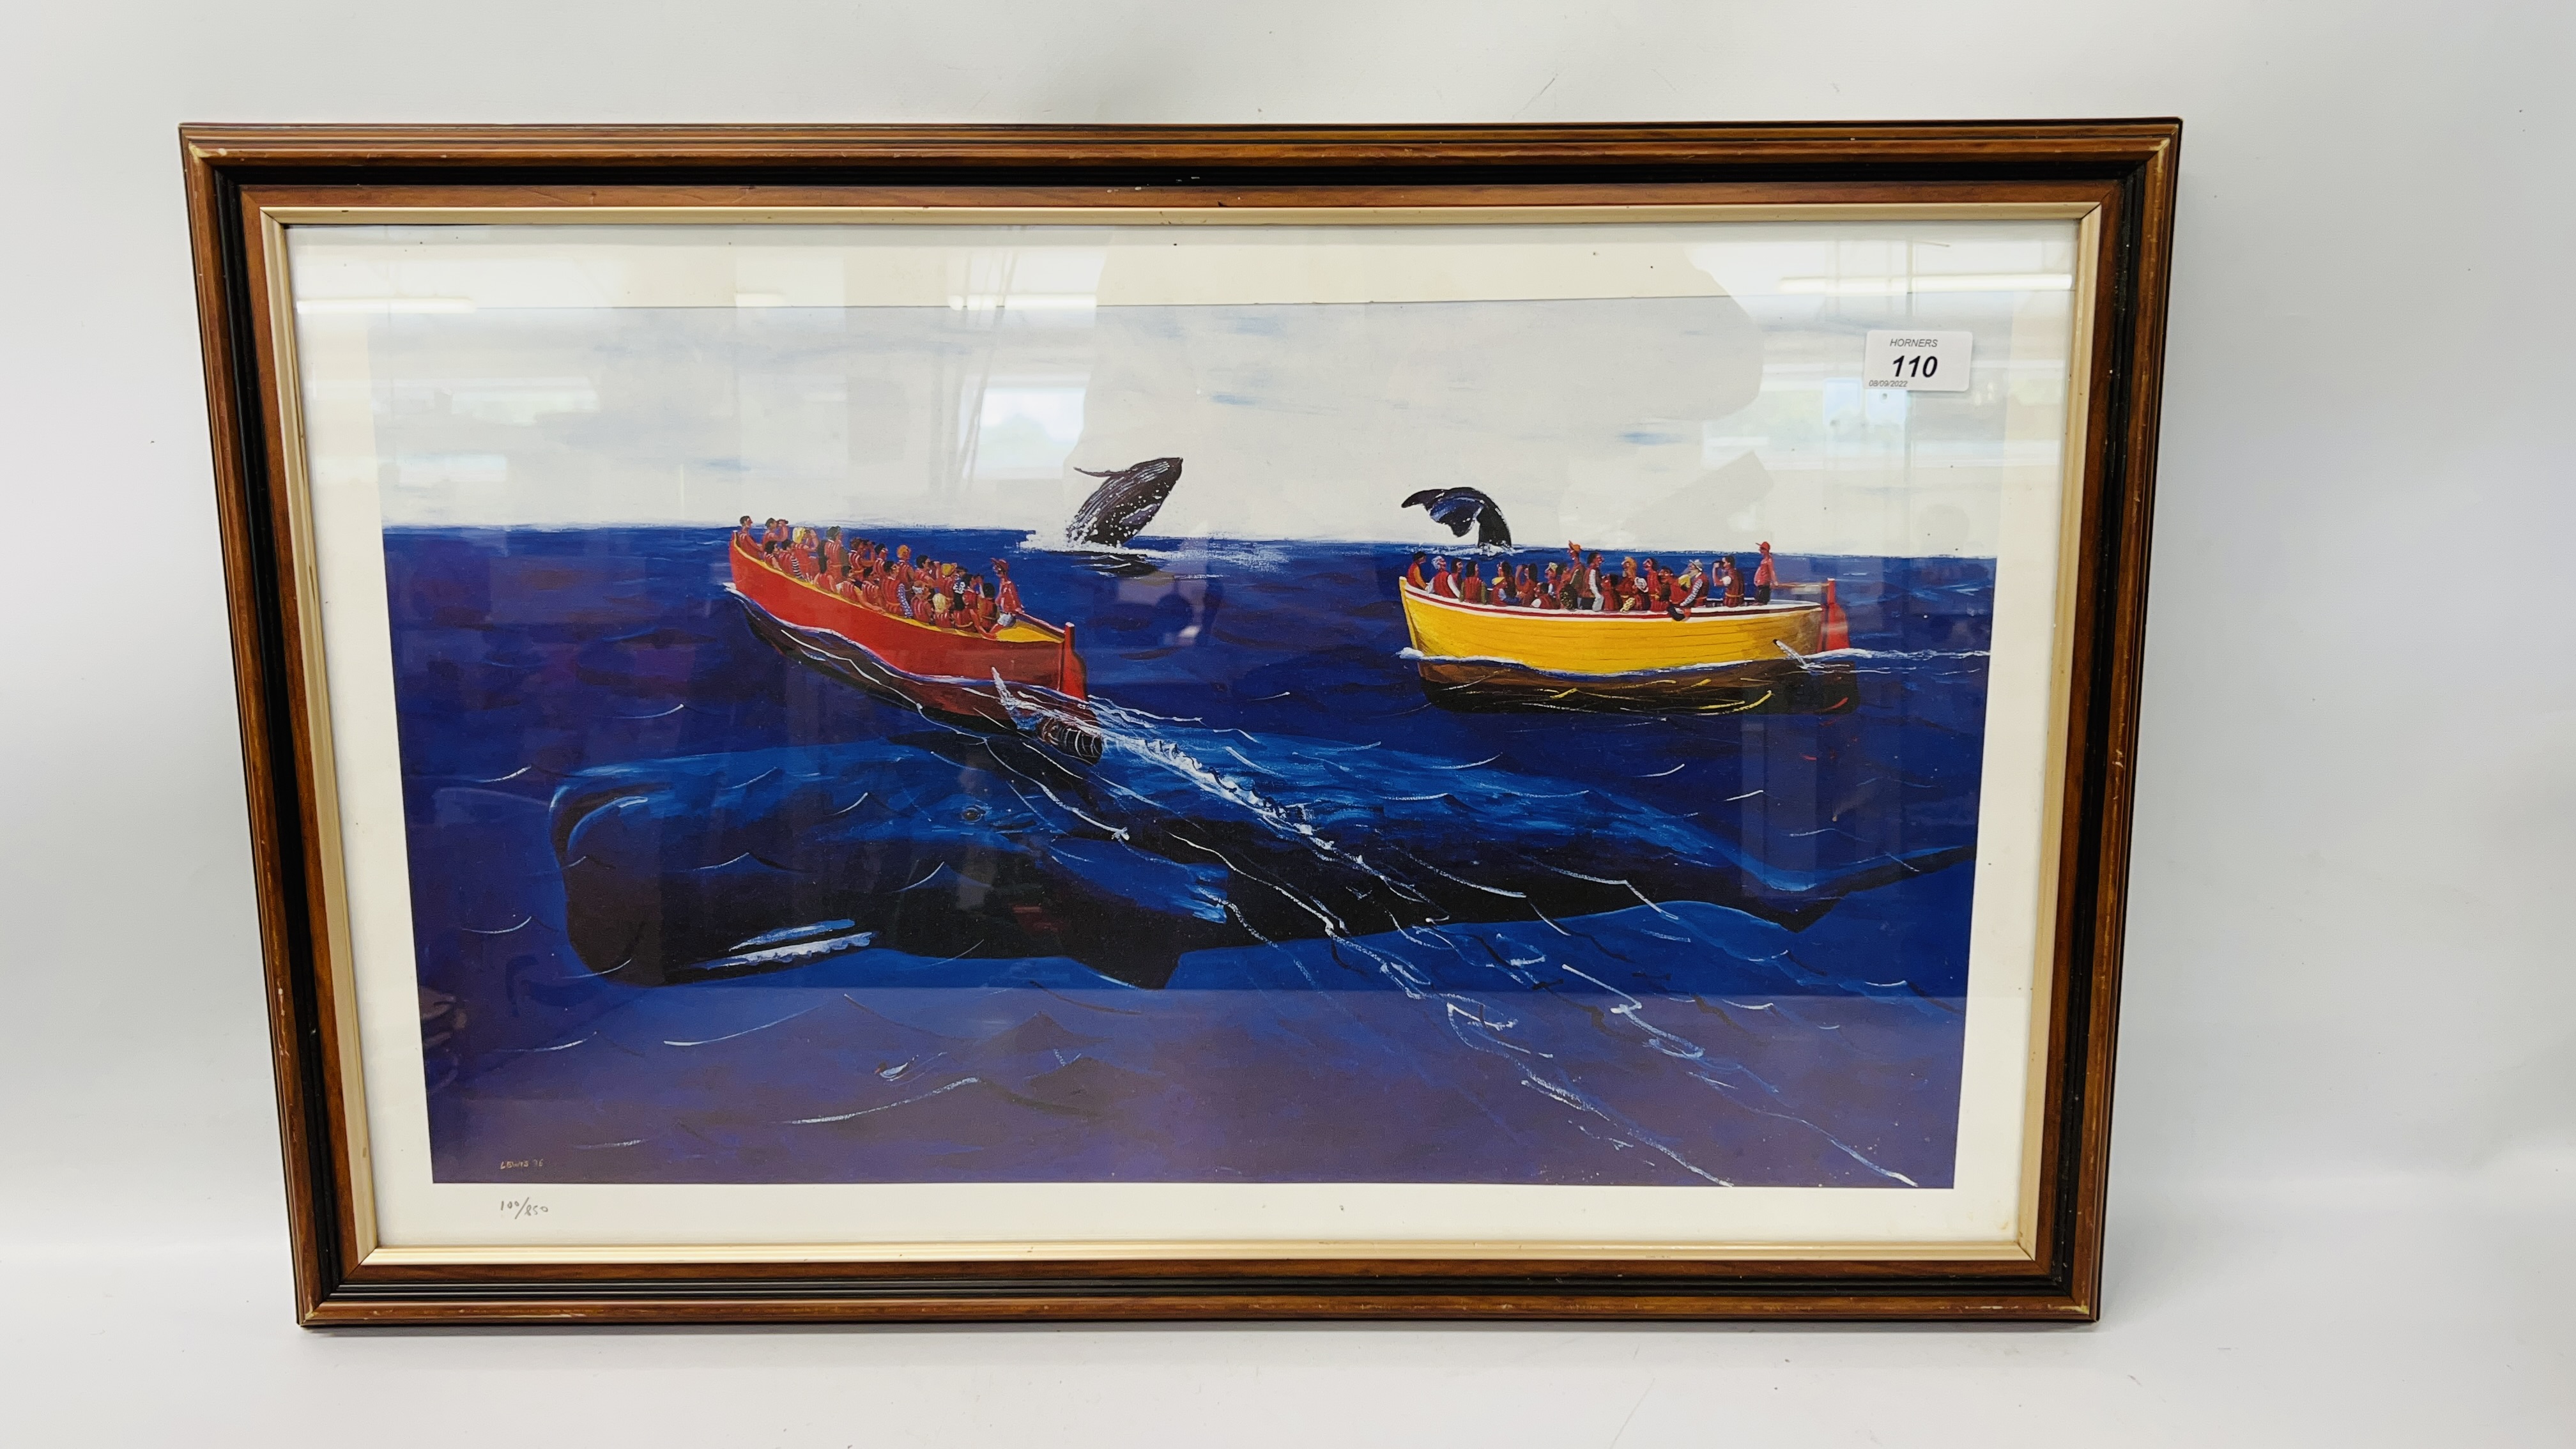 A FRAMED LIMITED EDITION LEWIS PRINT "WHALE WATCHING" 100/850 34CM X 59.5CM.